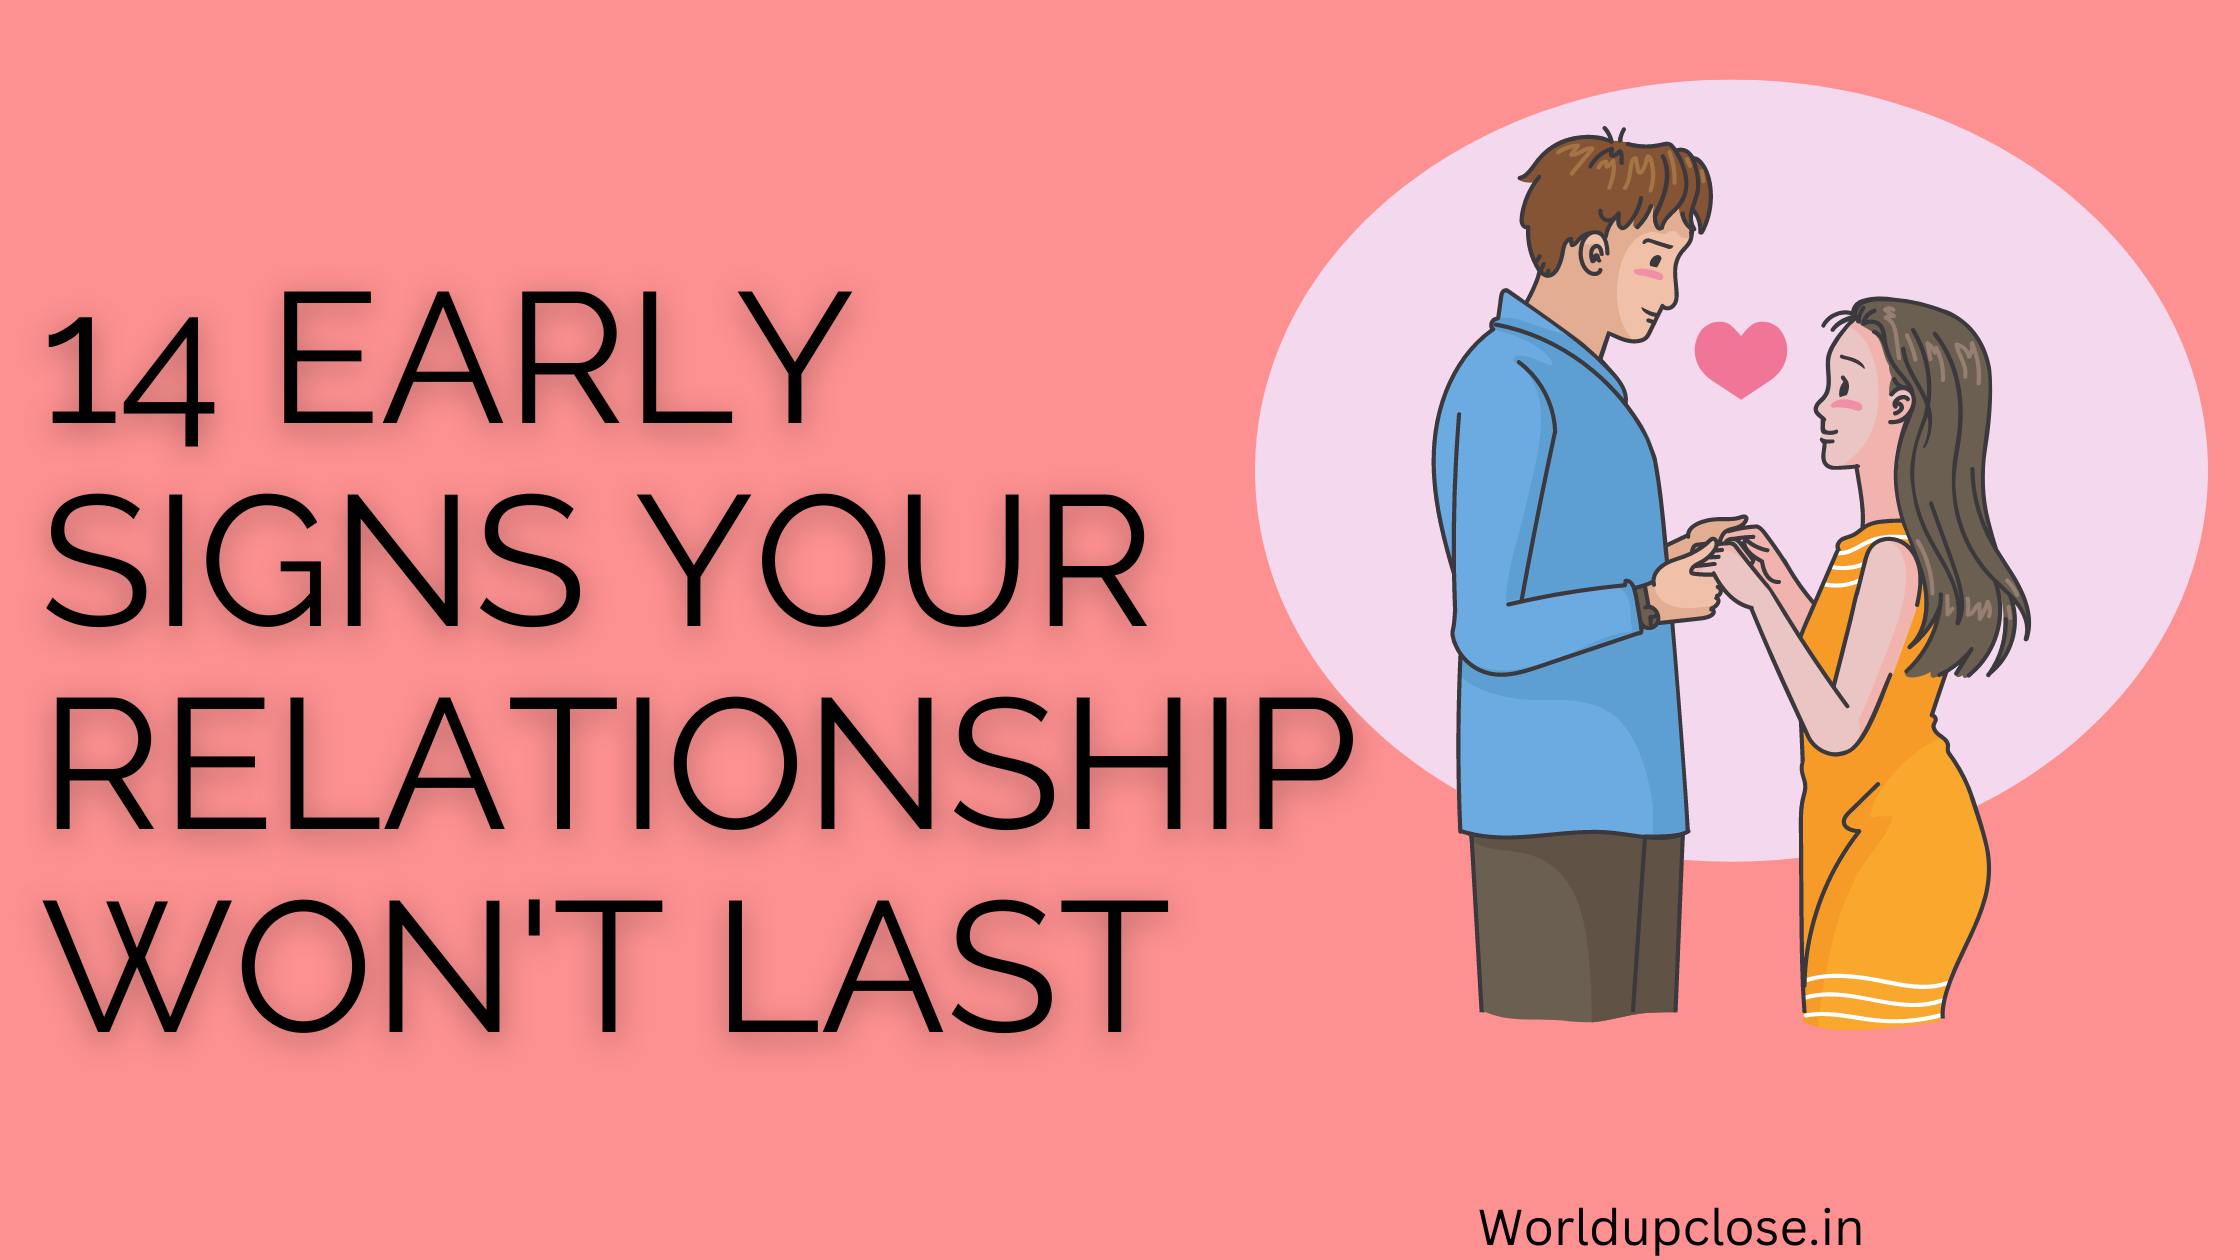 14 Early Signs Your Relationship Won't Last 1